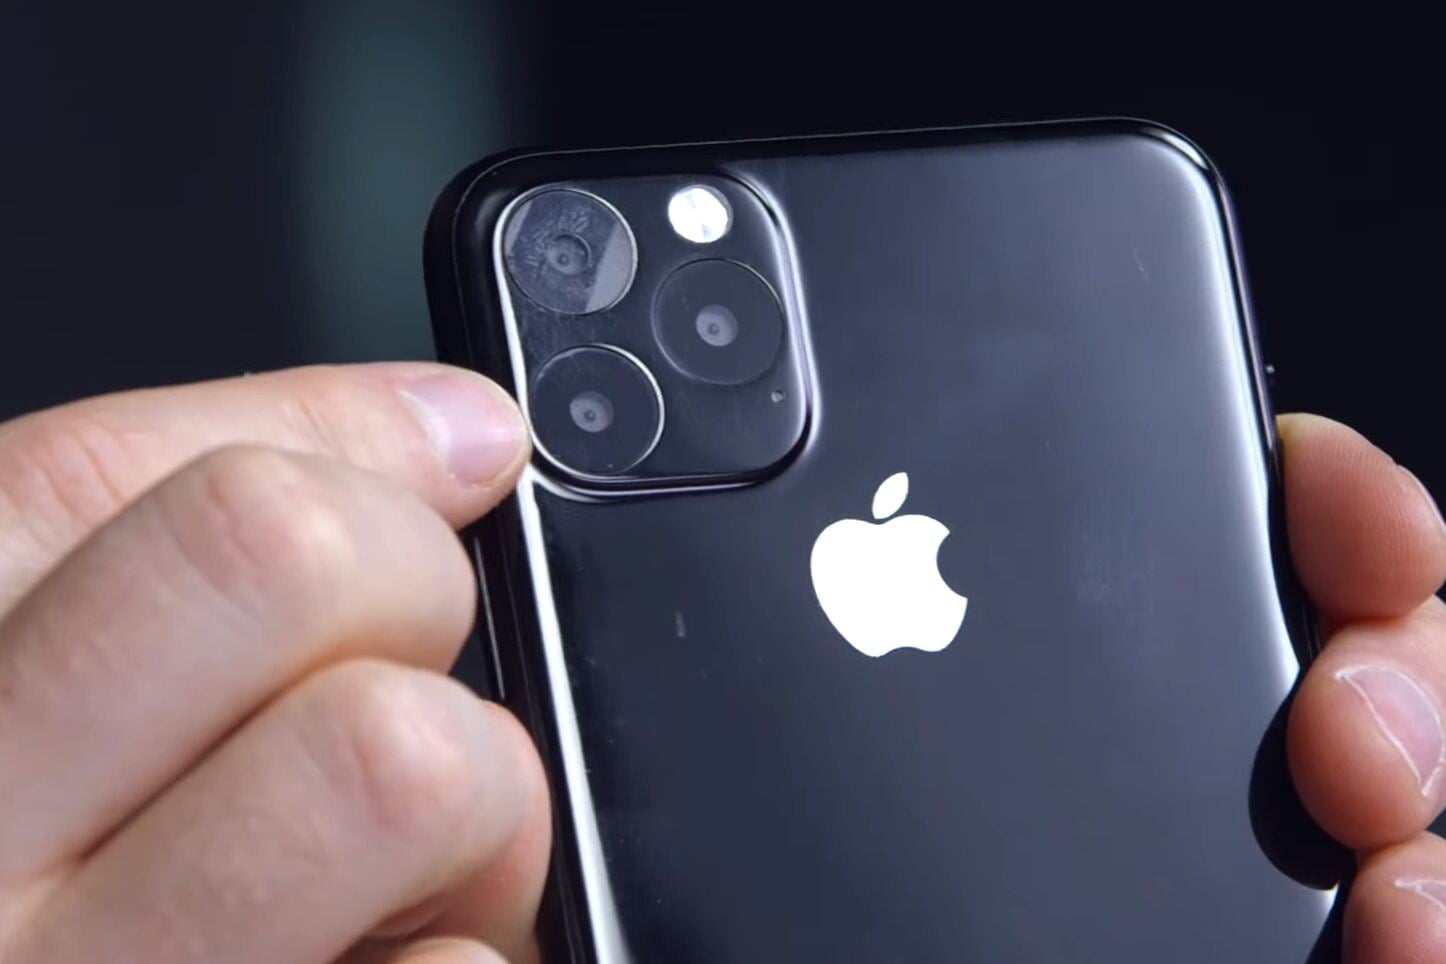 iPhone 11 Max/iPhone Pro dummy unit - Sketchy iPhone 11 rumors point towards some huge disappointments